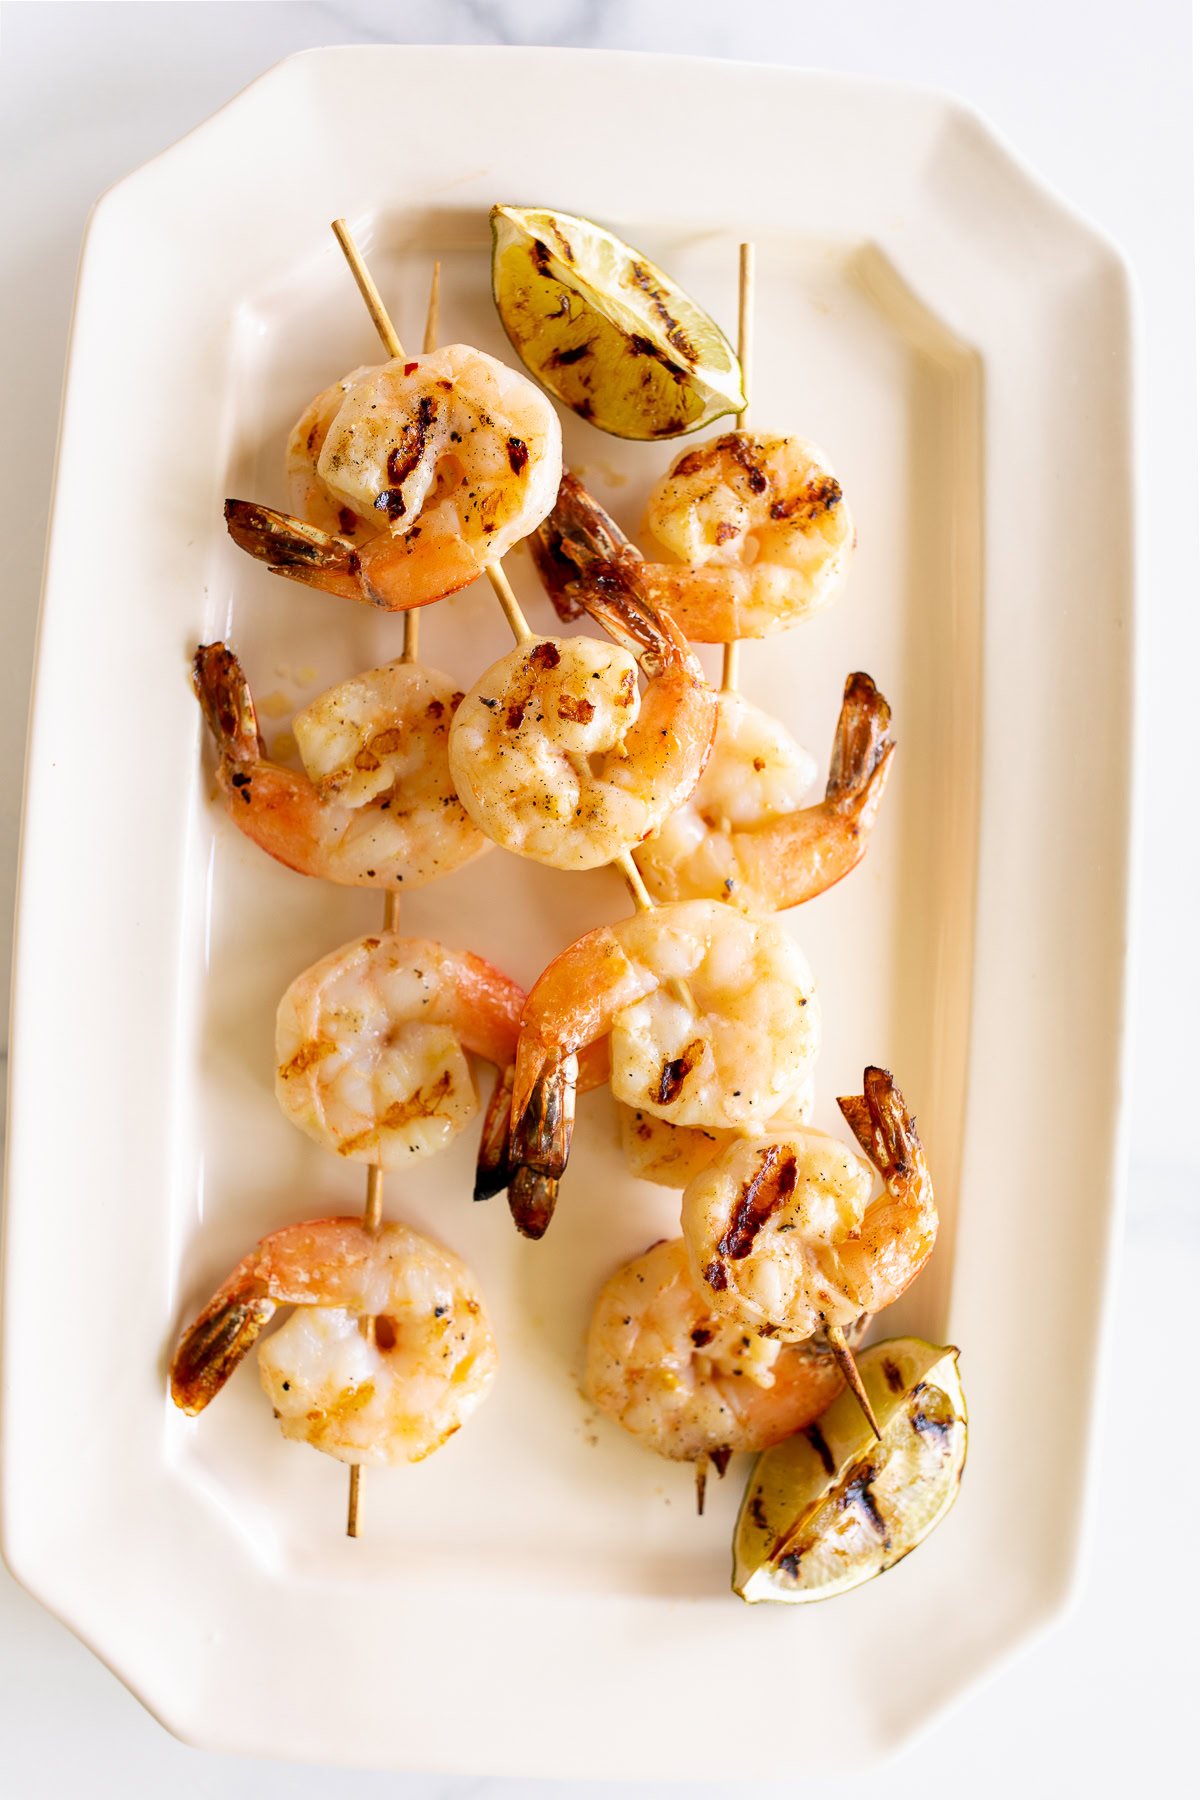 Two skewers of tequila lime shrimp garnished with grilled lemon wedges are served on a white rectangular plate.